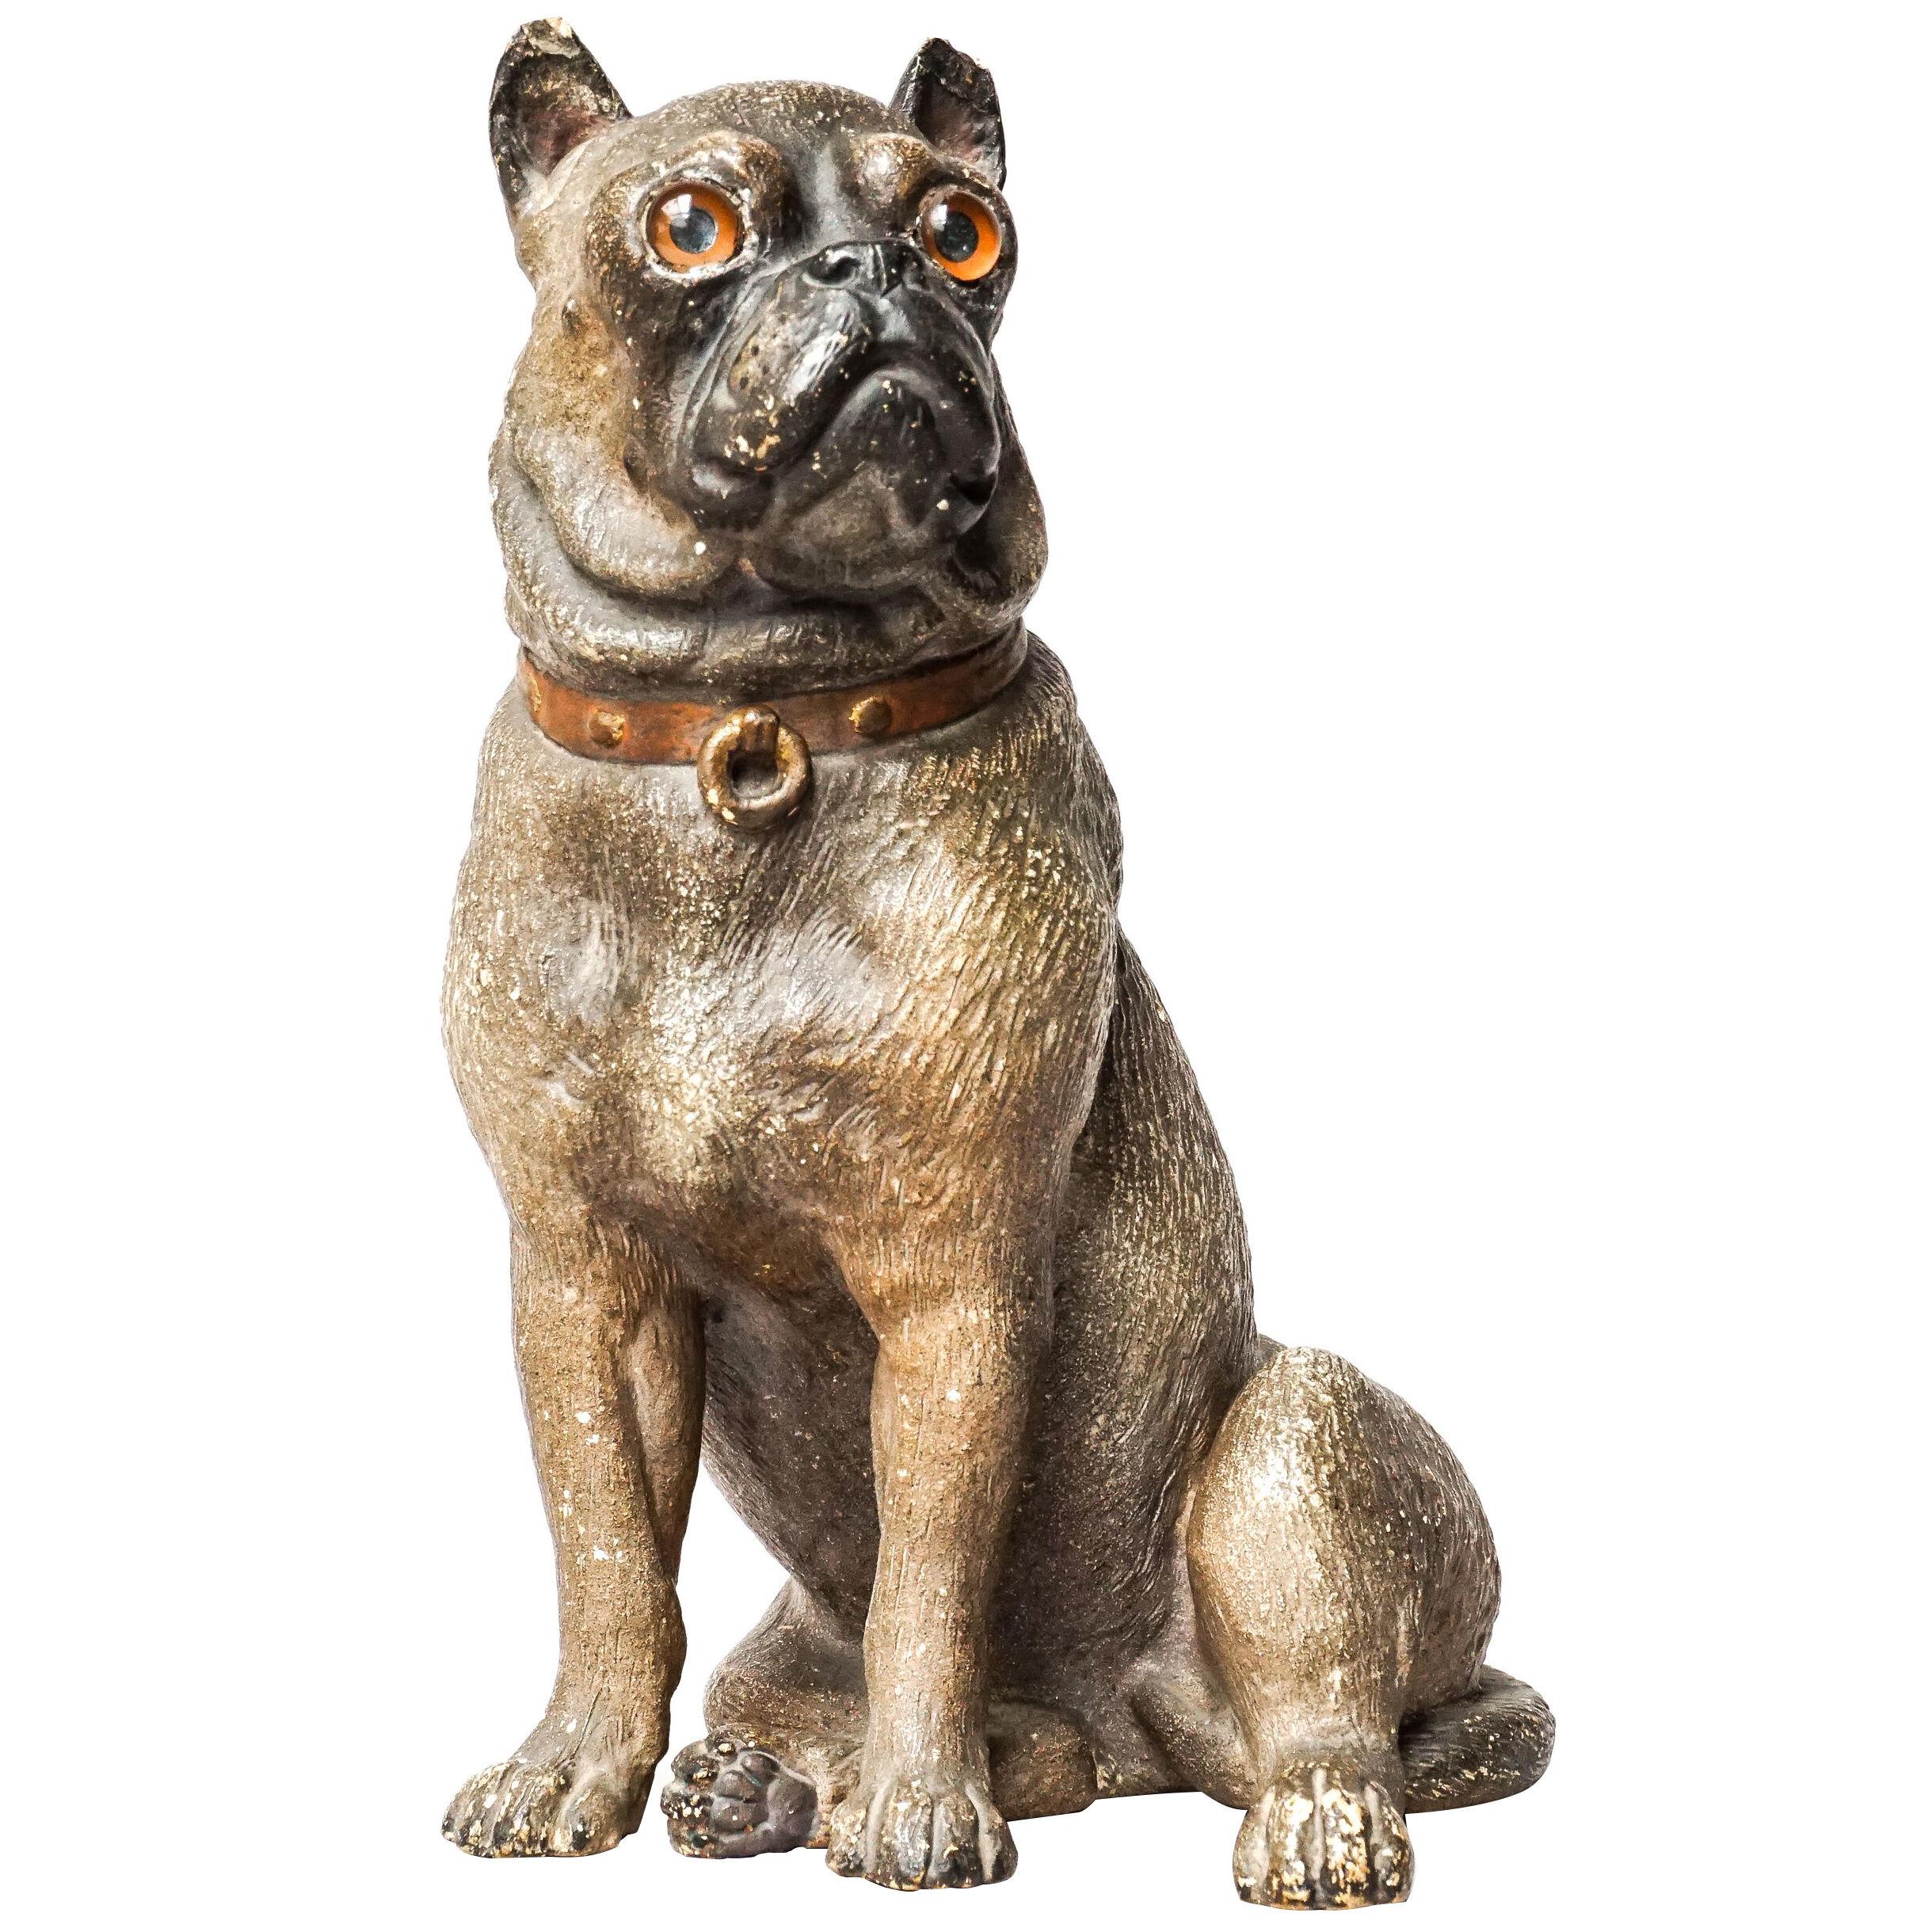 19th Century Austrian Seated Ceramic Pug Dog with Red Collar and Glass Eyes